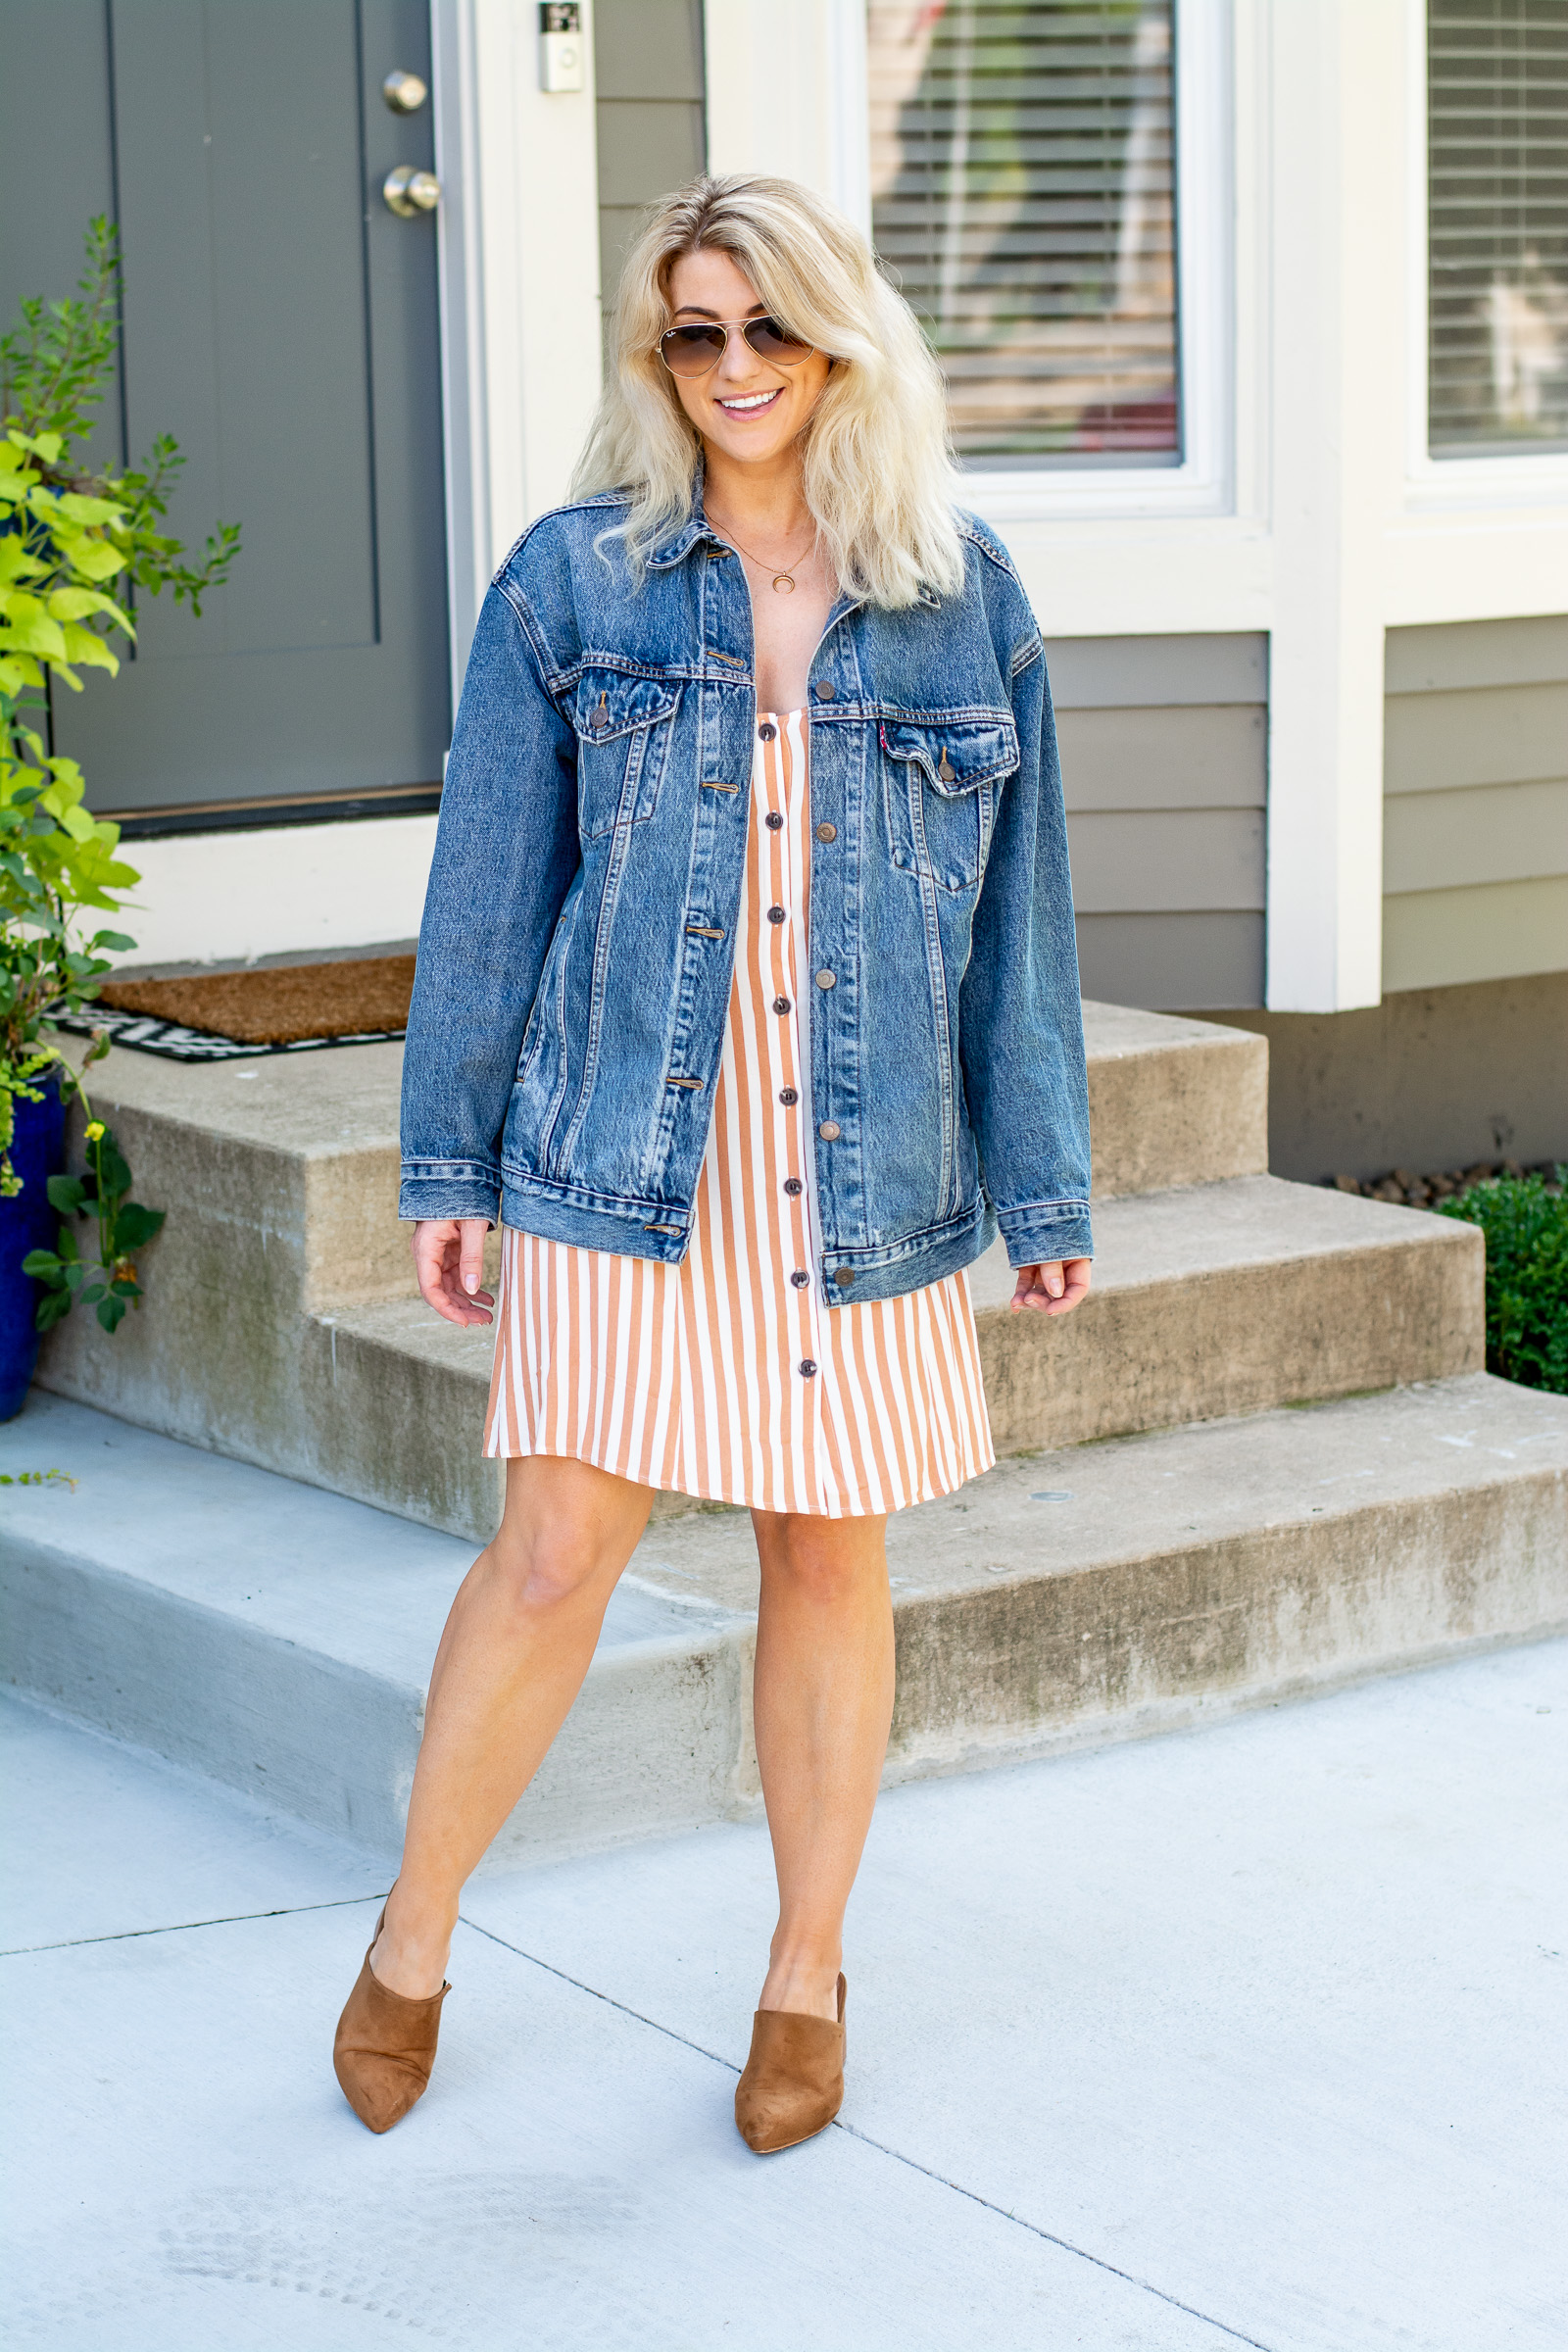 Early Fall Outfit: Oversized Jean Jacket + Summer Dress. | LSR